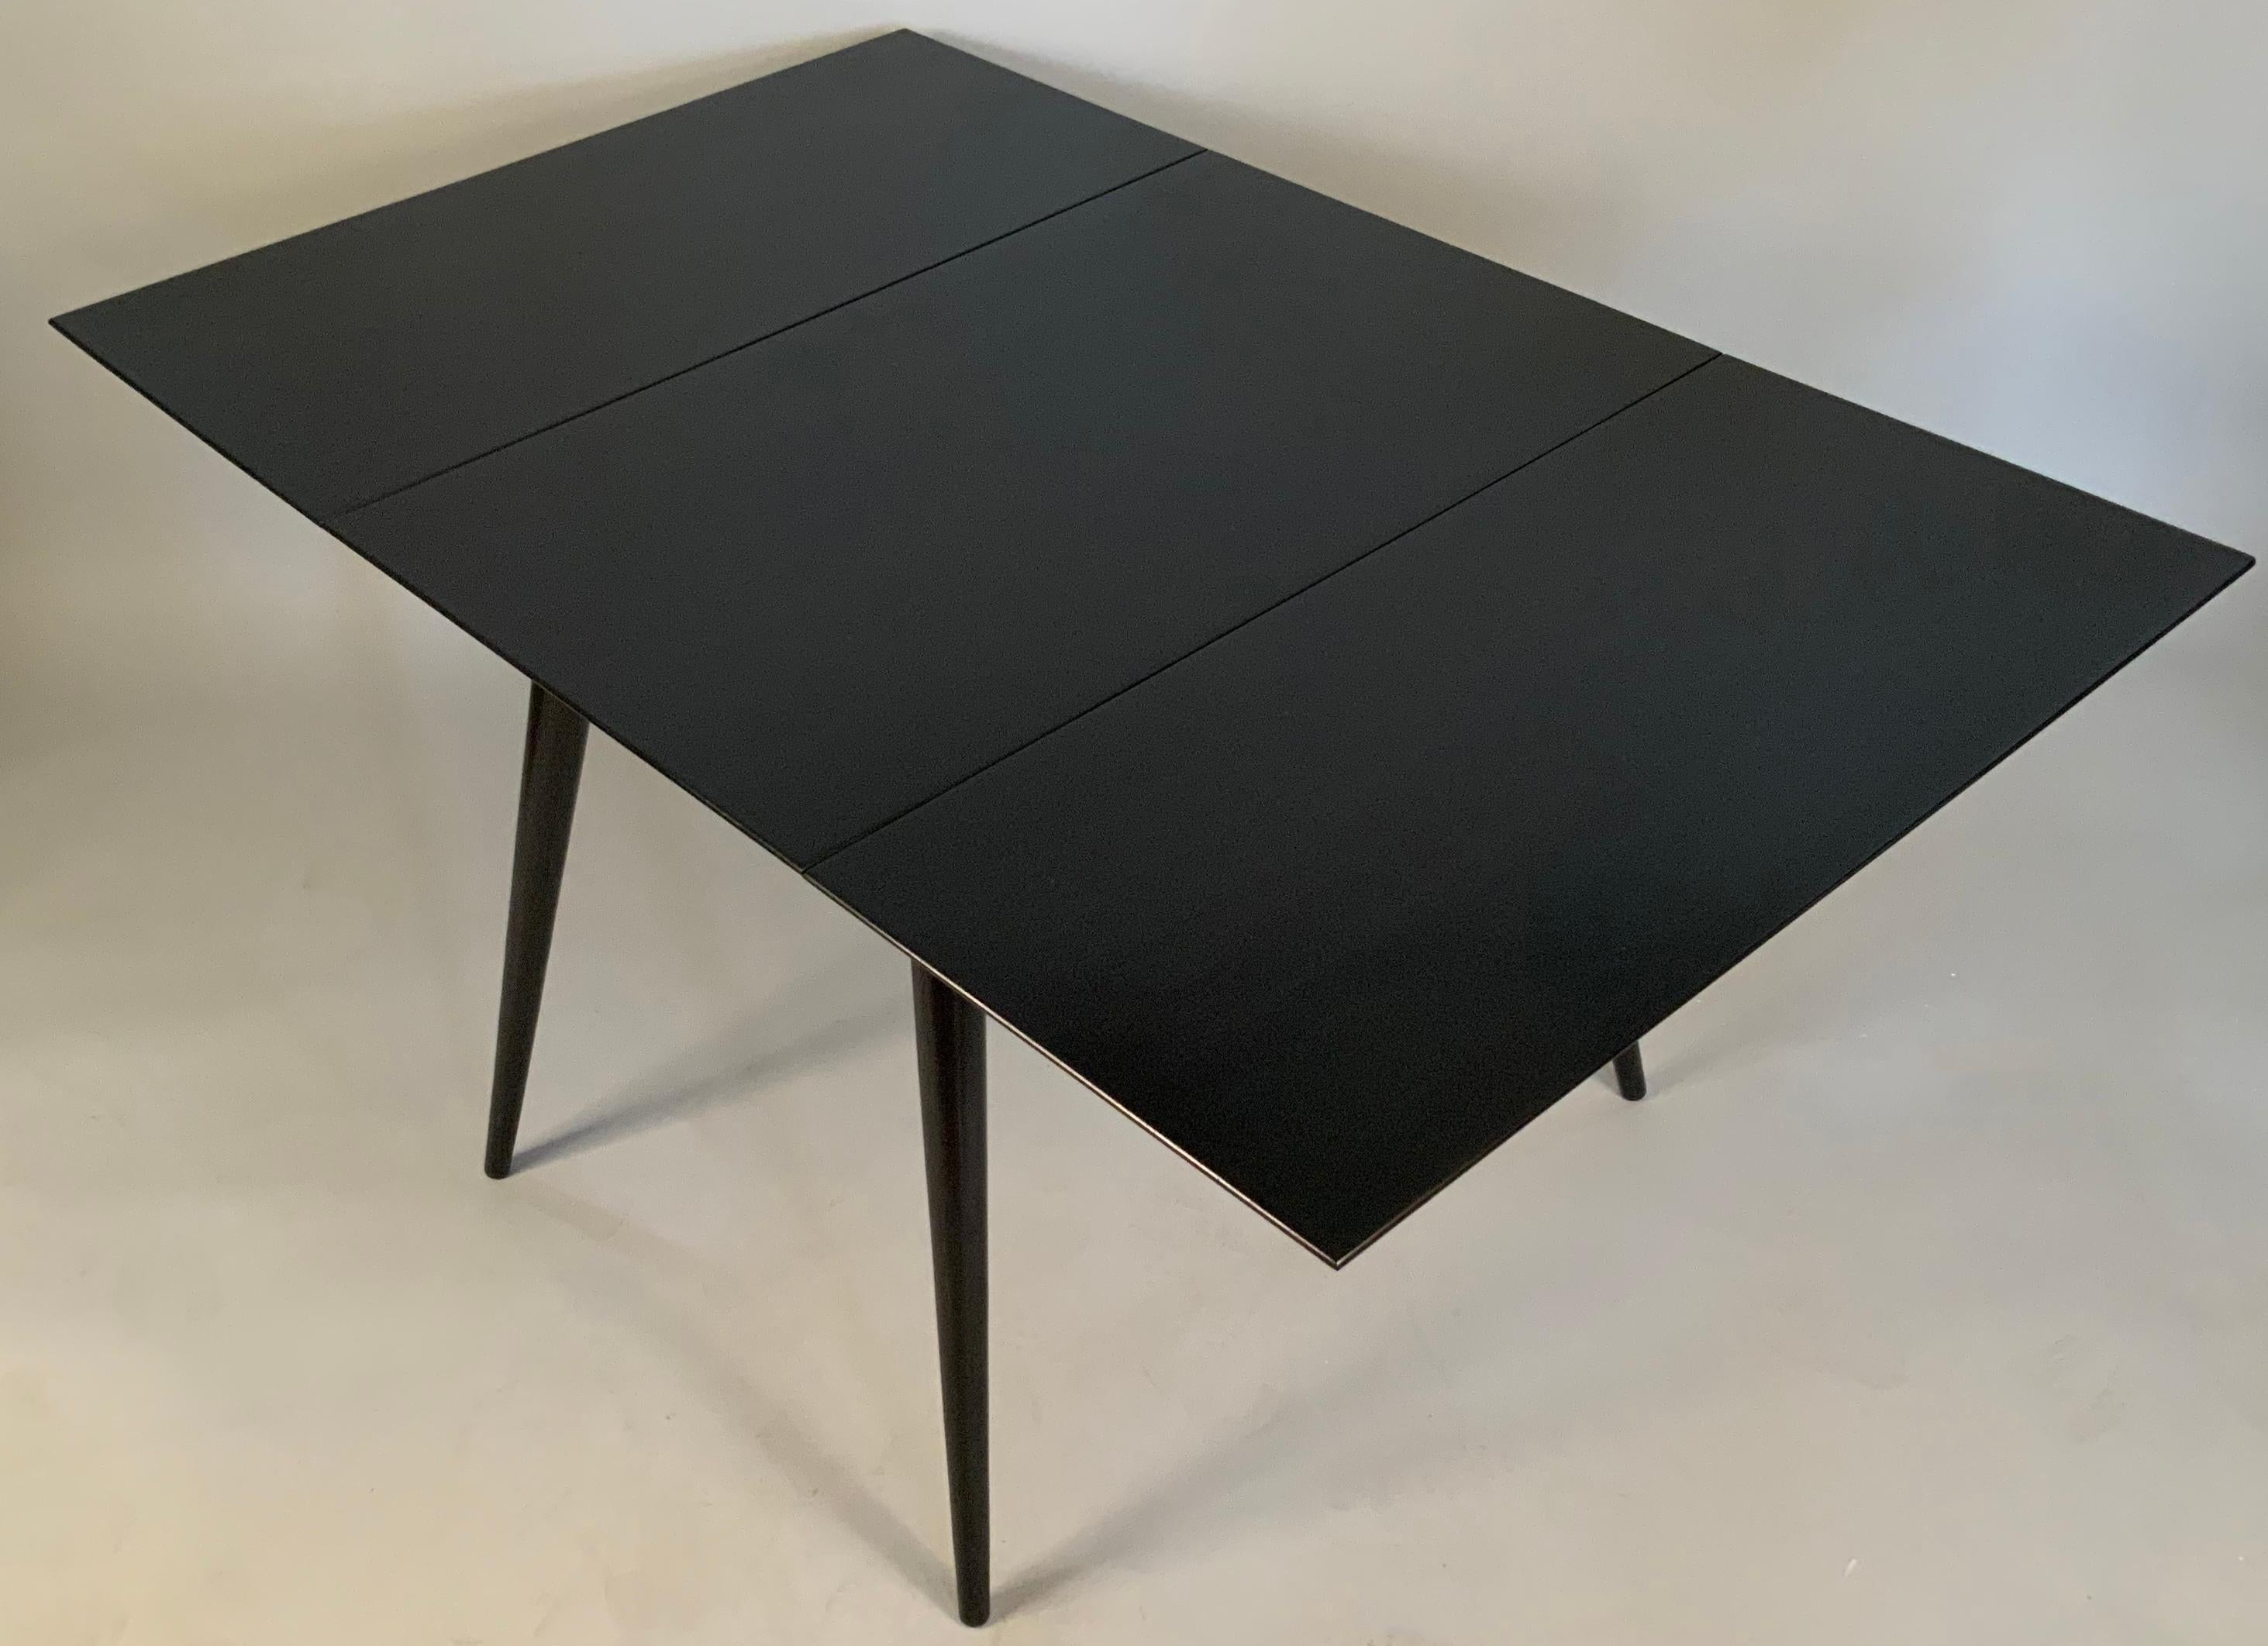 A beautiful 1950's ebonized birch dining table by Paul McCobb. made wtih a pair of drop leaves on the sides, so it can be used in many variations. excellent condition.